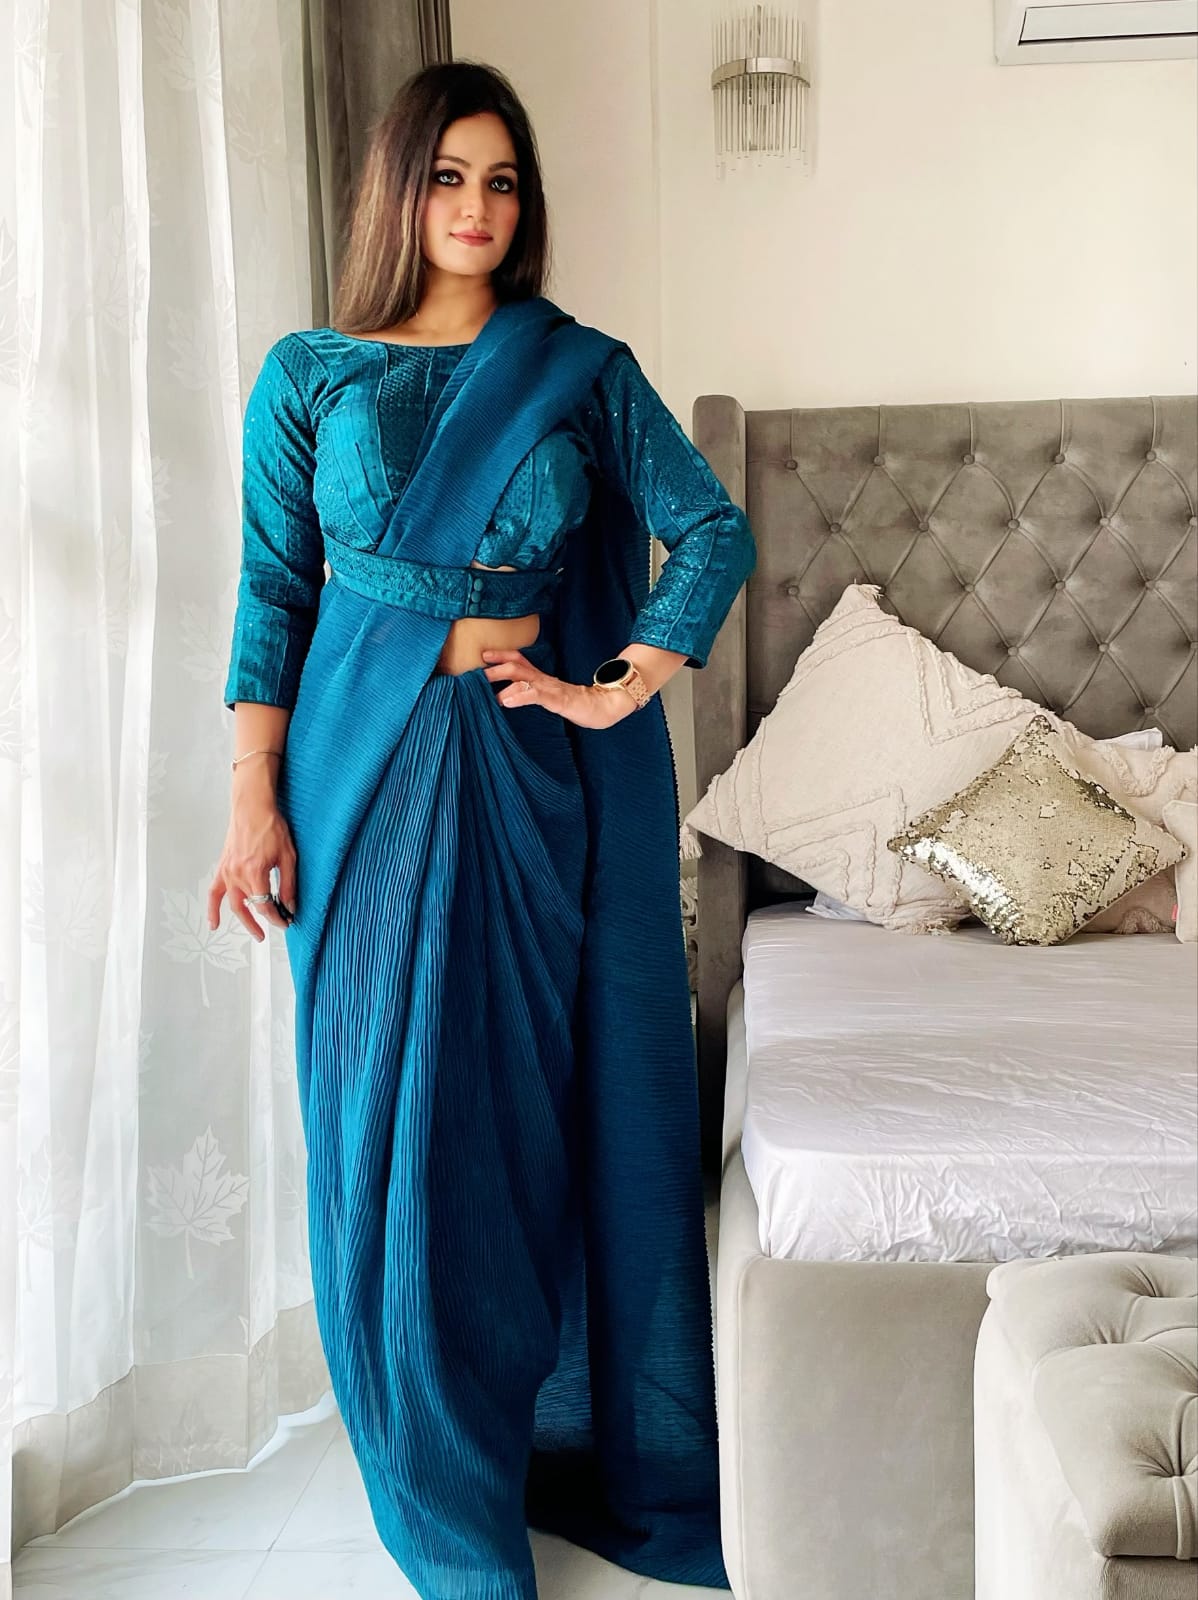 Teal Blue Color Plated Saree And Attached Belt Blouse